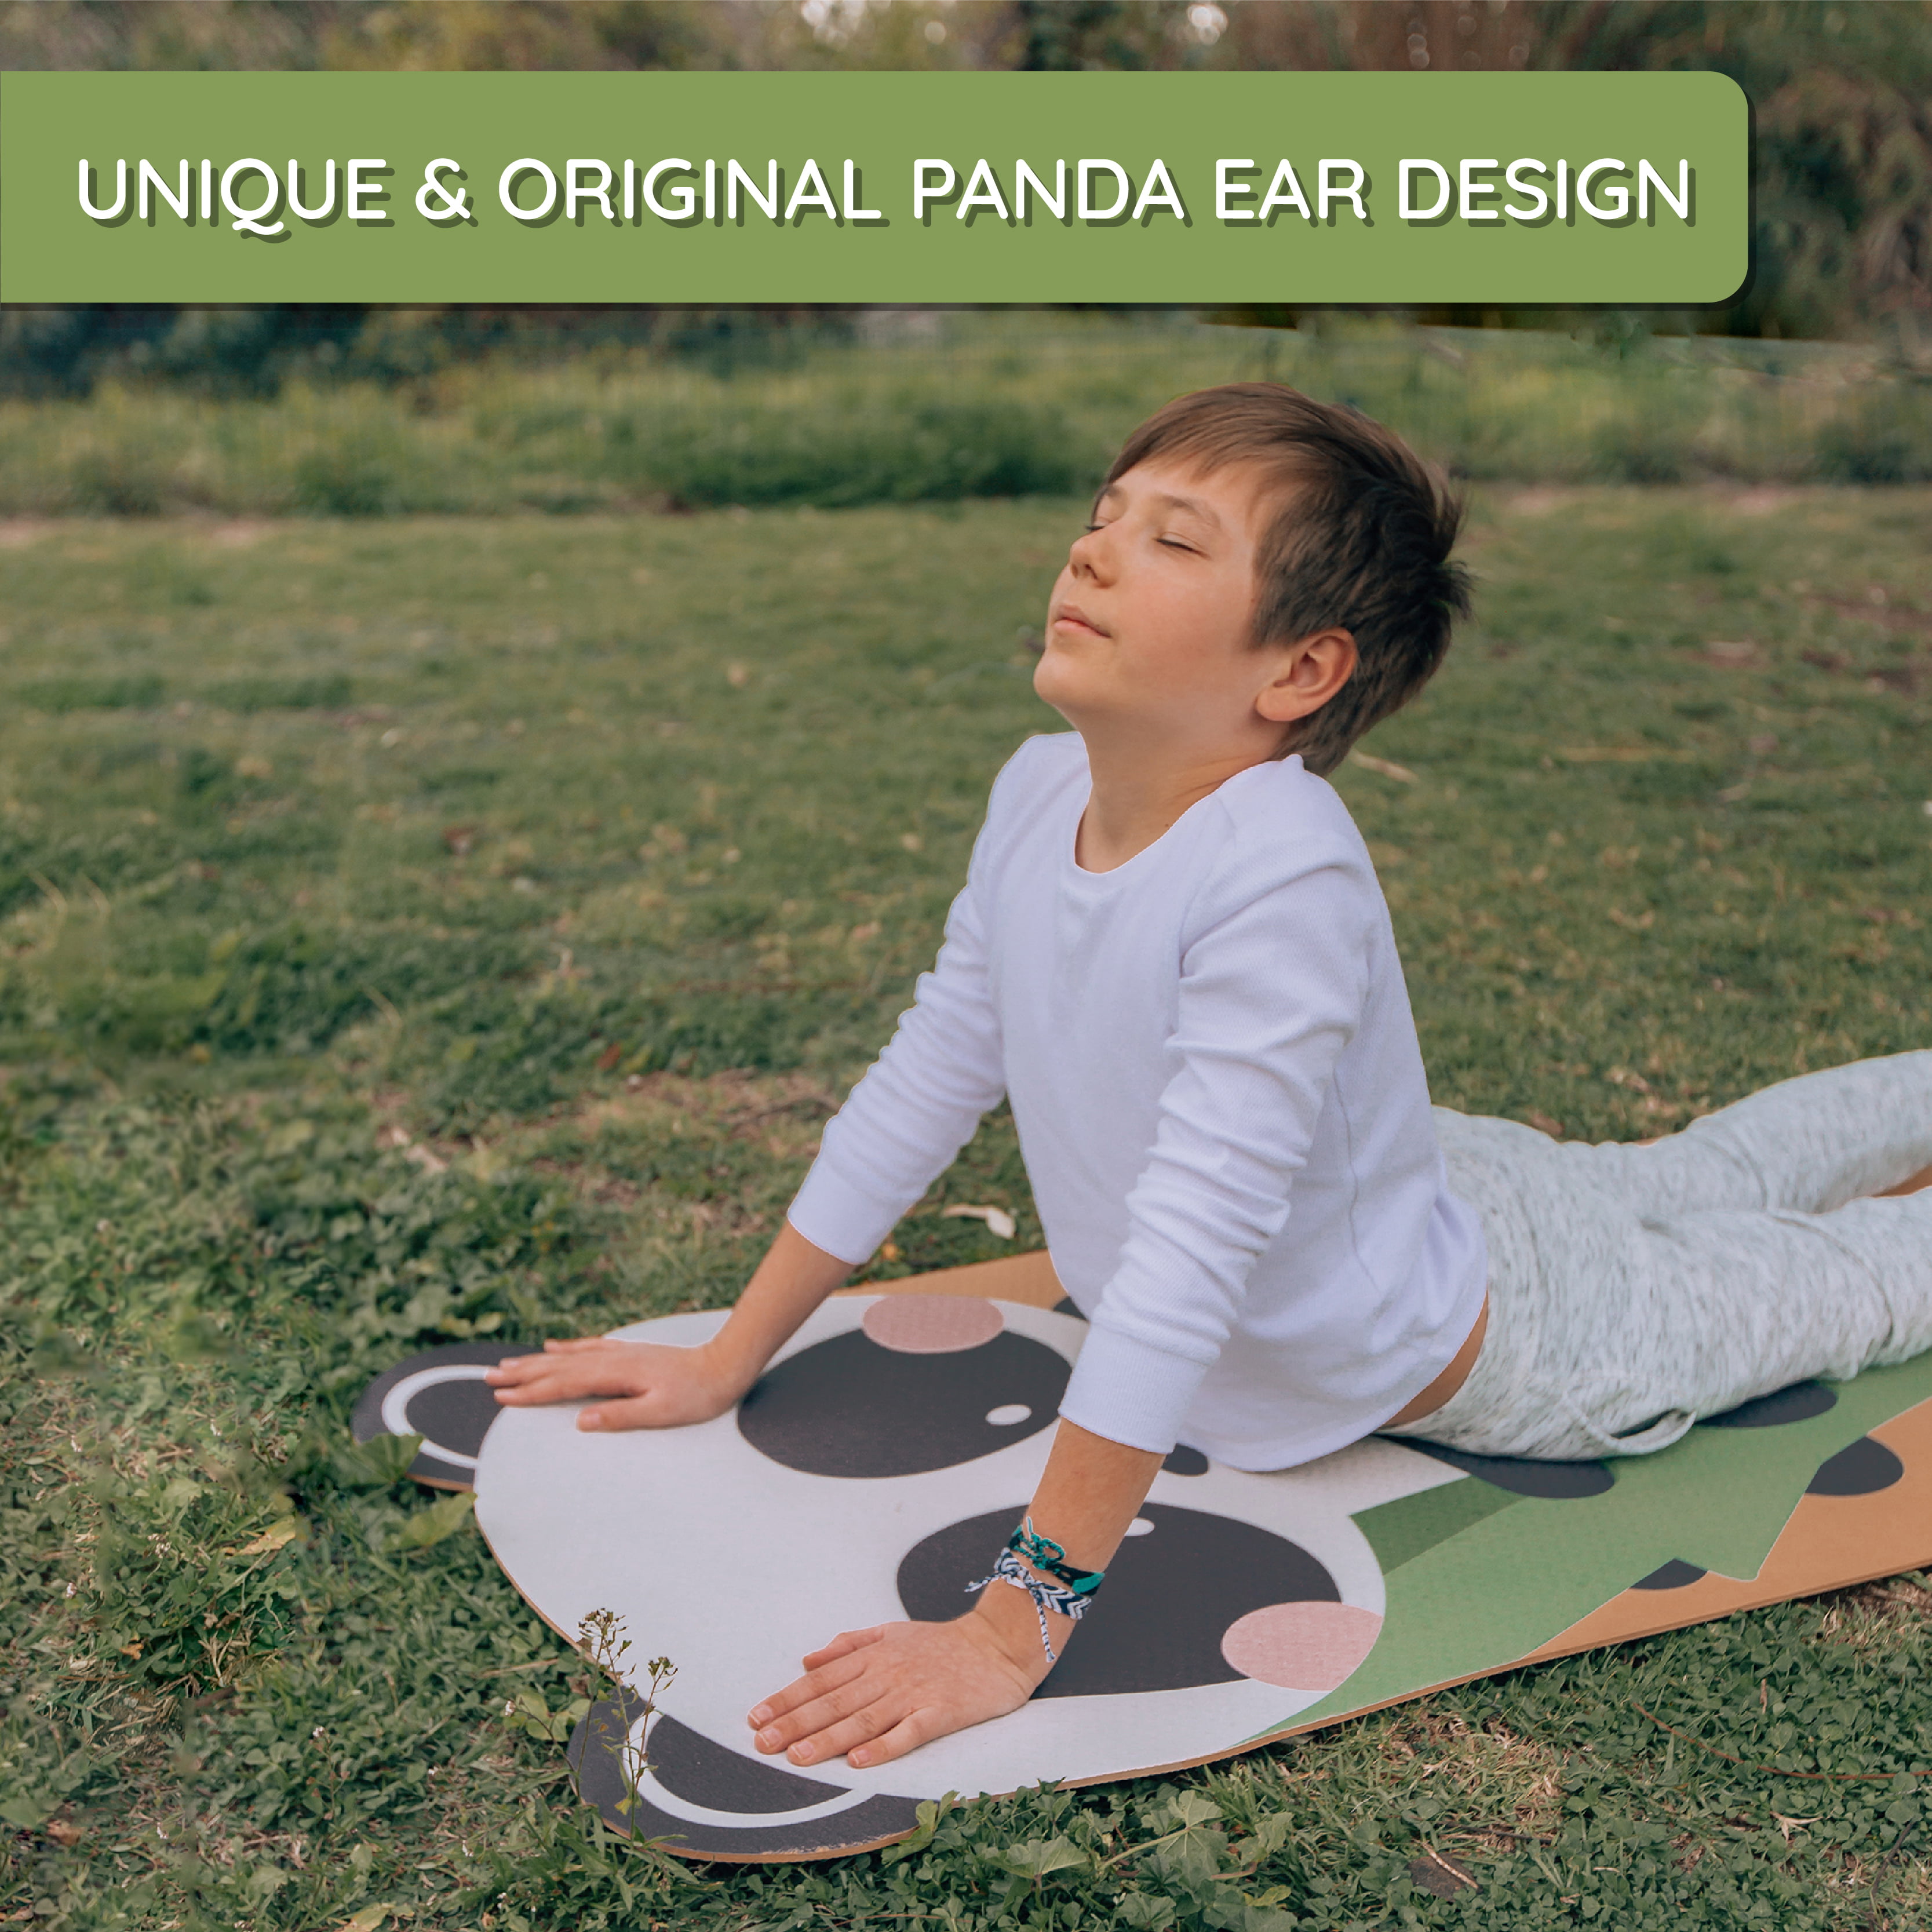 Kids Yoga Panda Mat for Girls and Boys w/ Panda Ears by ABTECH Cute Non Slip Kids Exercise Equipment Comfortable w/ Yoga Straps for Easy Carrying Lightweight Ages 3-12 60x24x0.2 Inches 